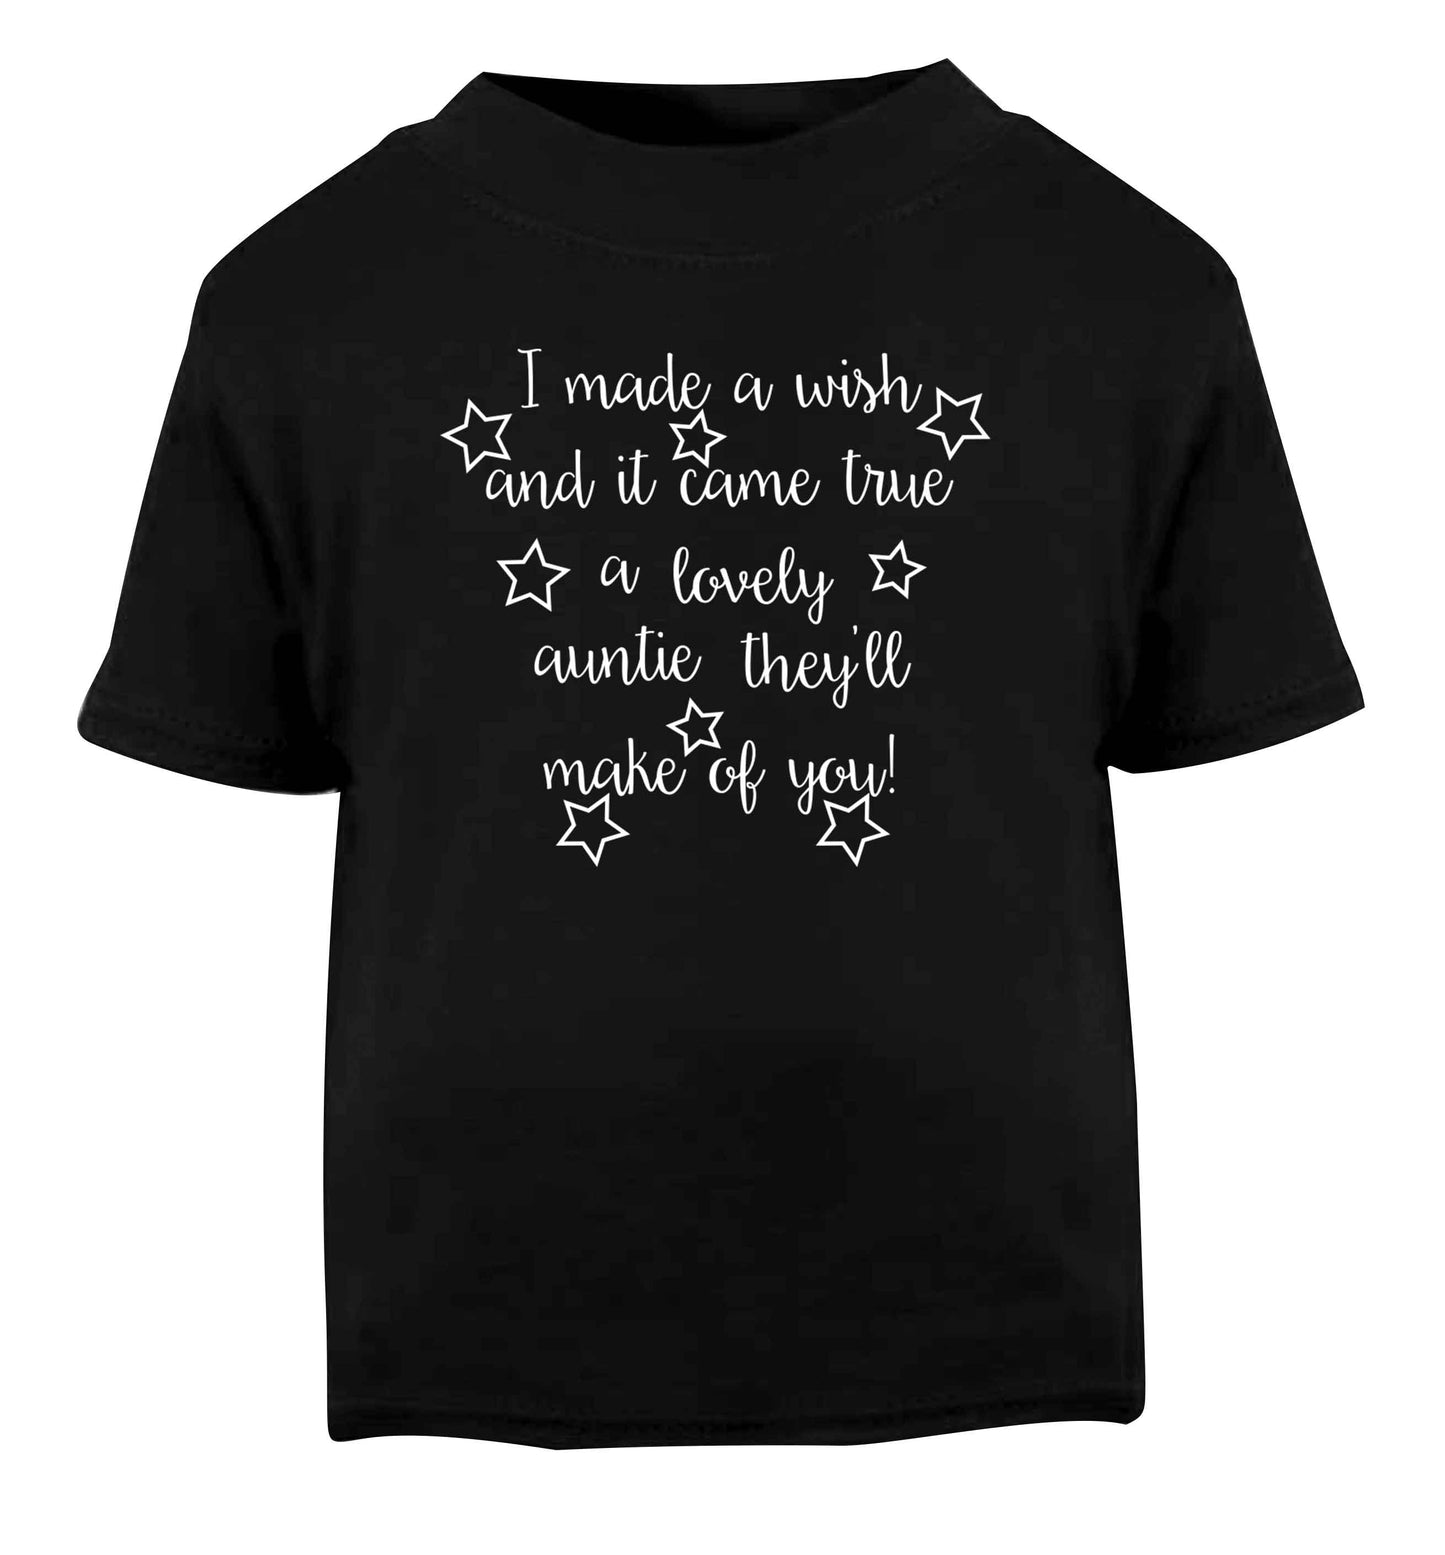 I made a wish and it came true a lovely auntie they'll make of you! Black Baby Toddler Tshirt 2 years